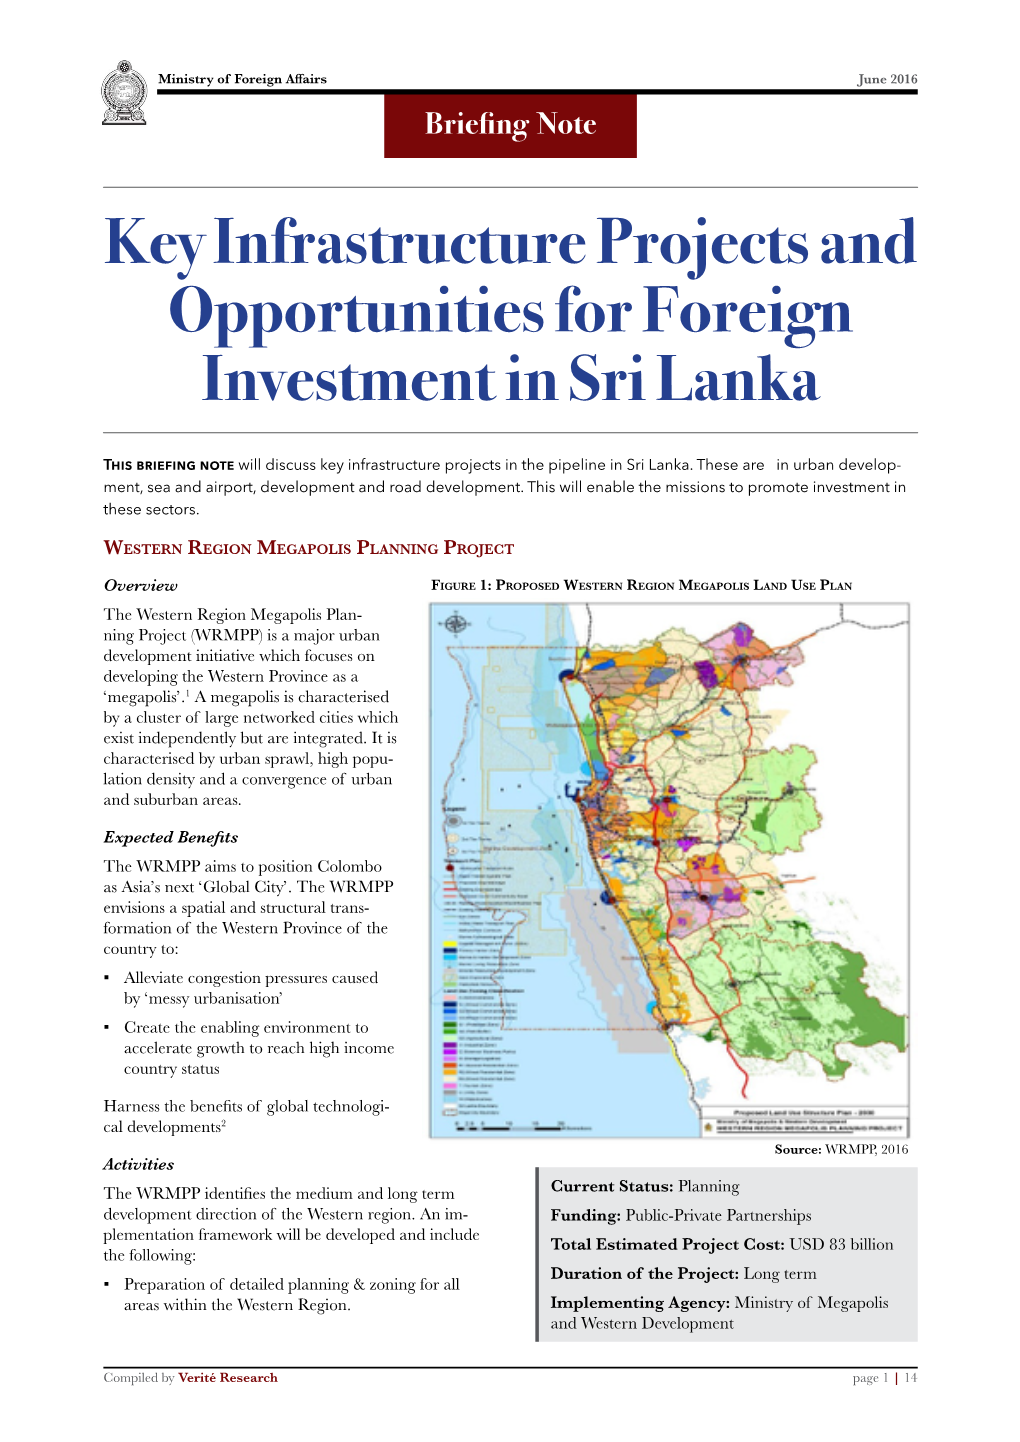 Key Infrastructure Projects and Opportunities for Foreign Investment in Sri Lanka